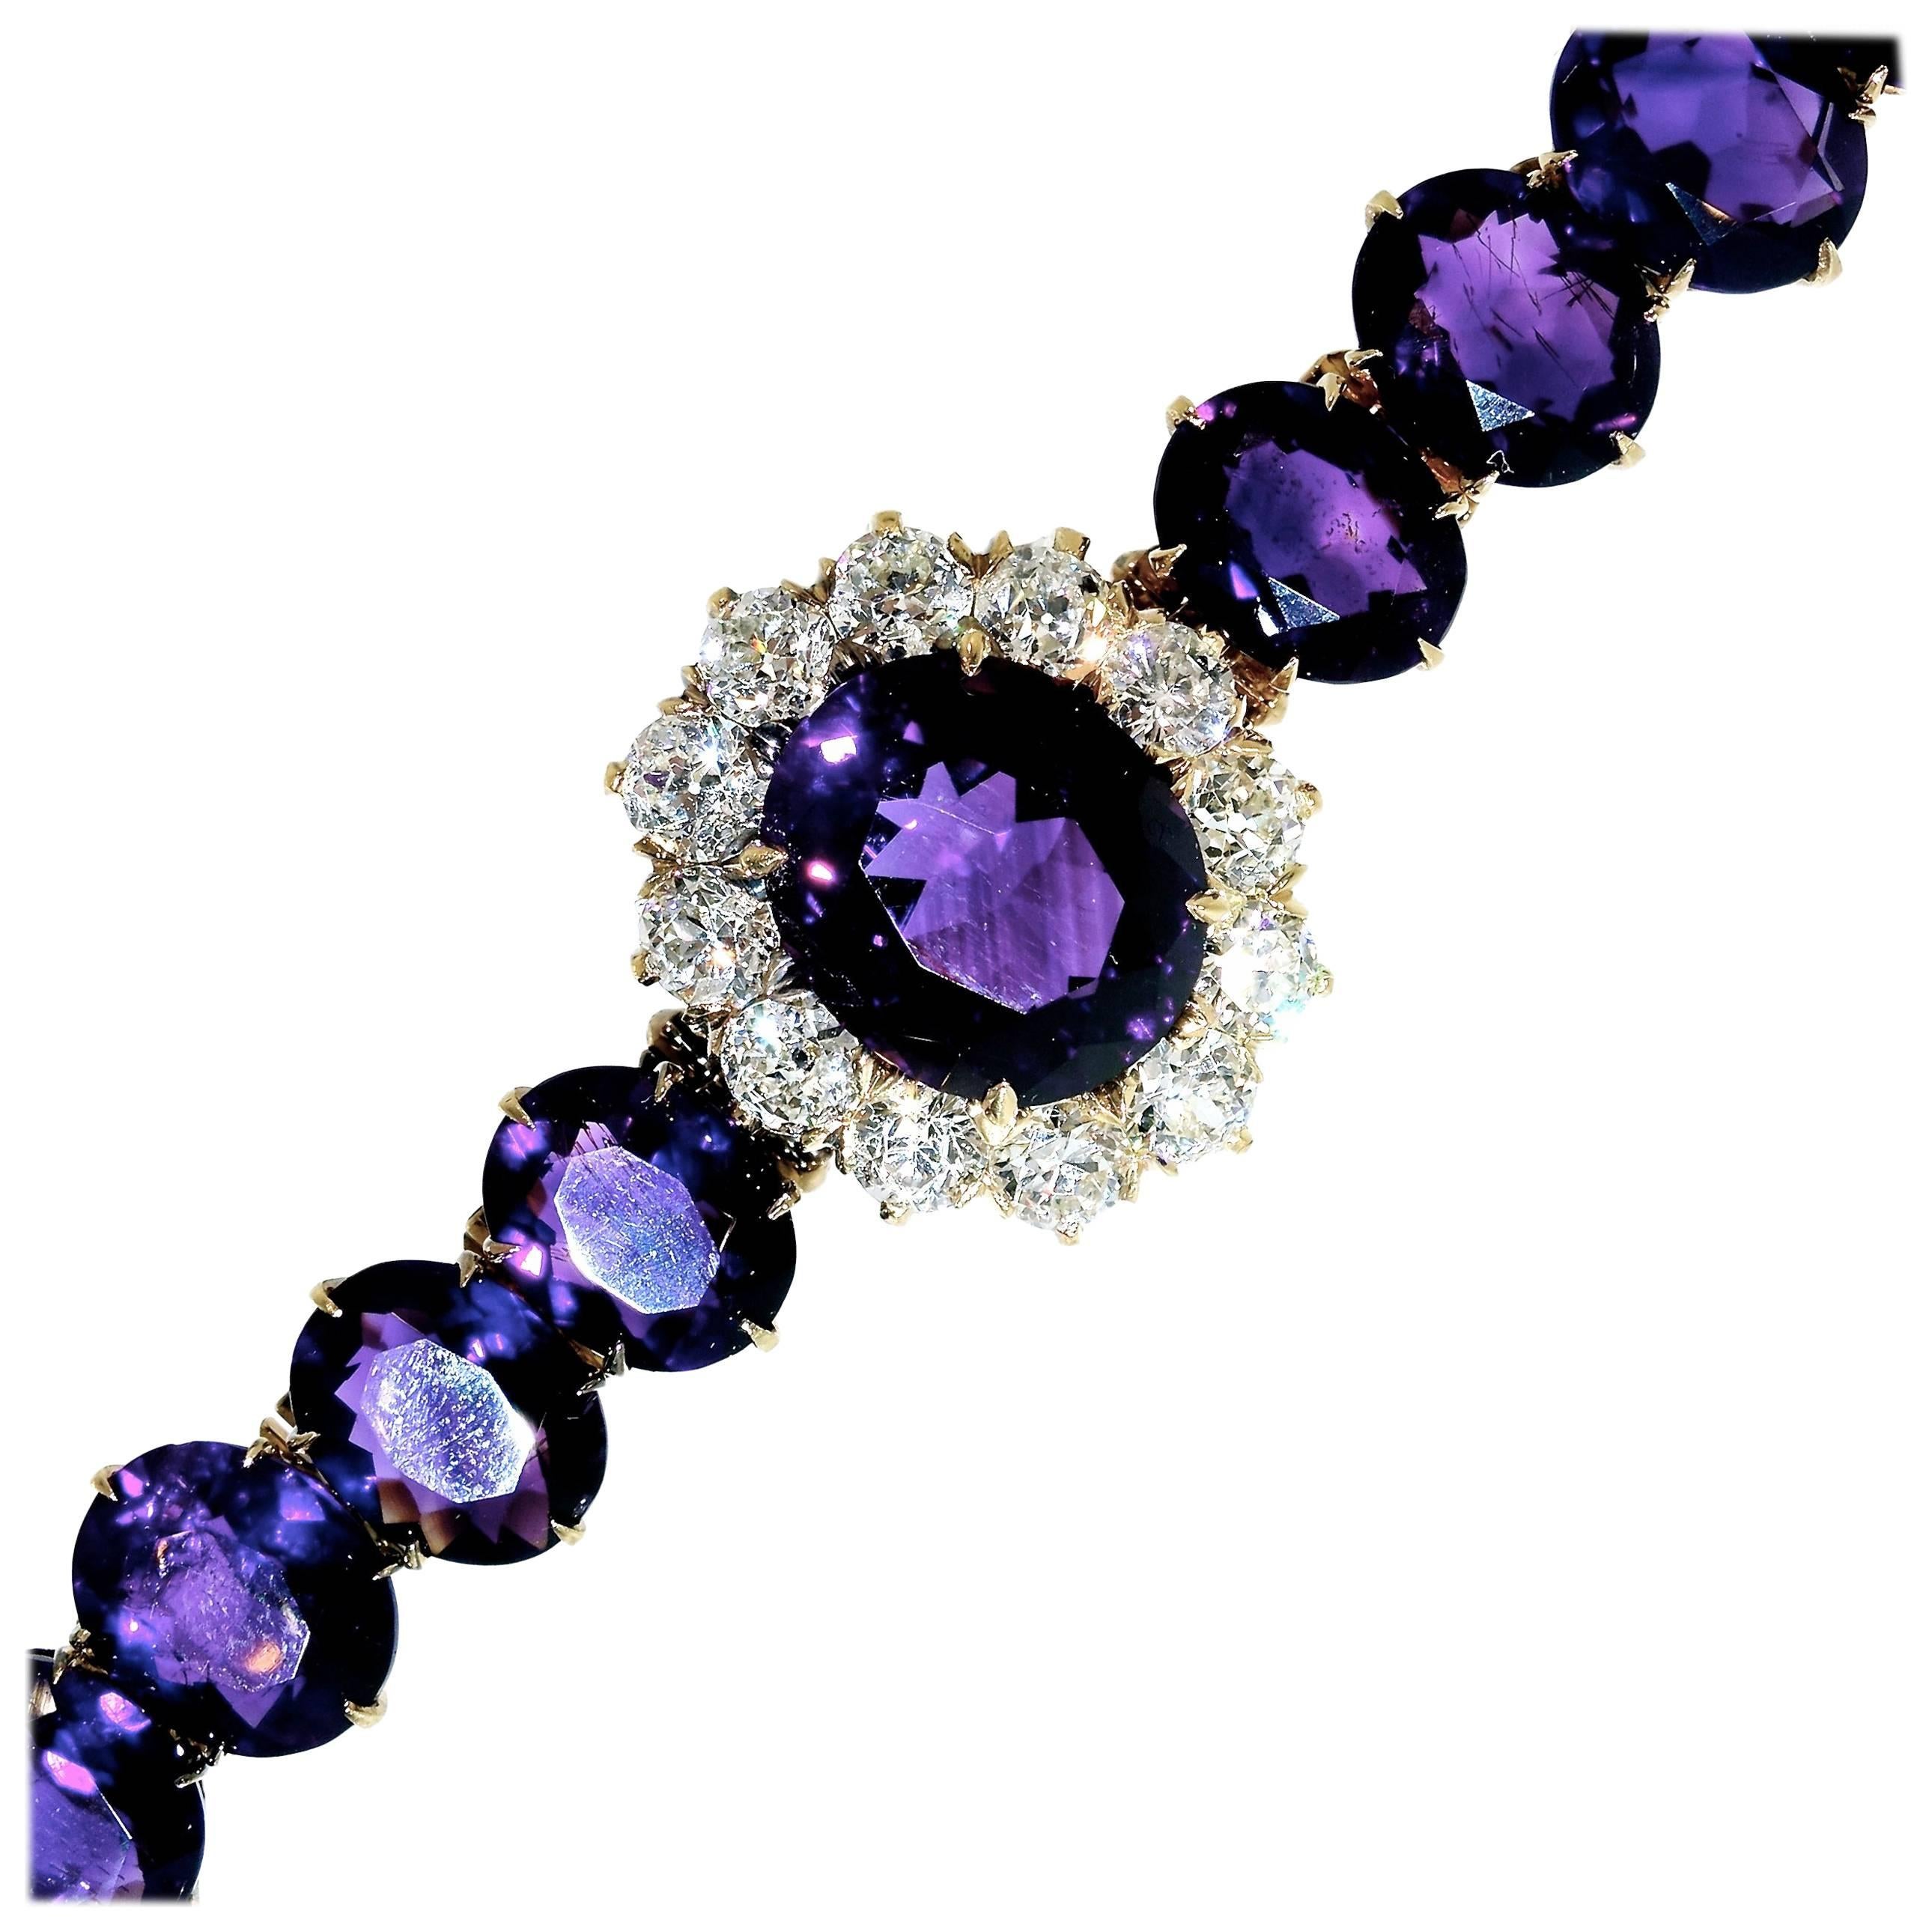 19th century gold bracelet with approximately 35 cts. of fine deep purple/red natural amethysts and 3.6 cts of 
European cut diamonds, all near colorless and very slightly included.  This bracelet is well made and 6.75 inches in length.